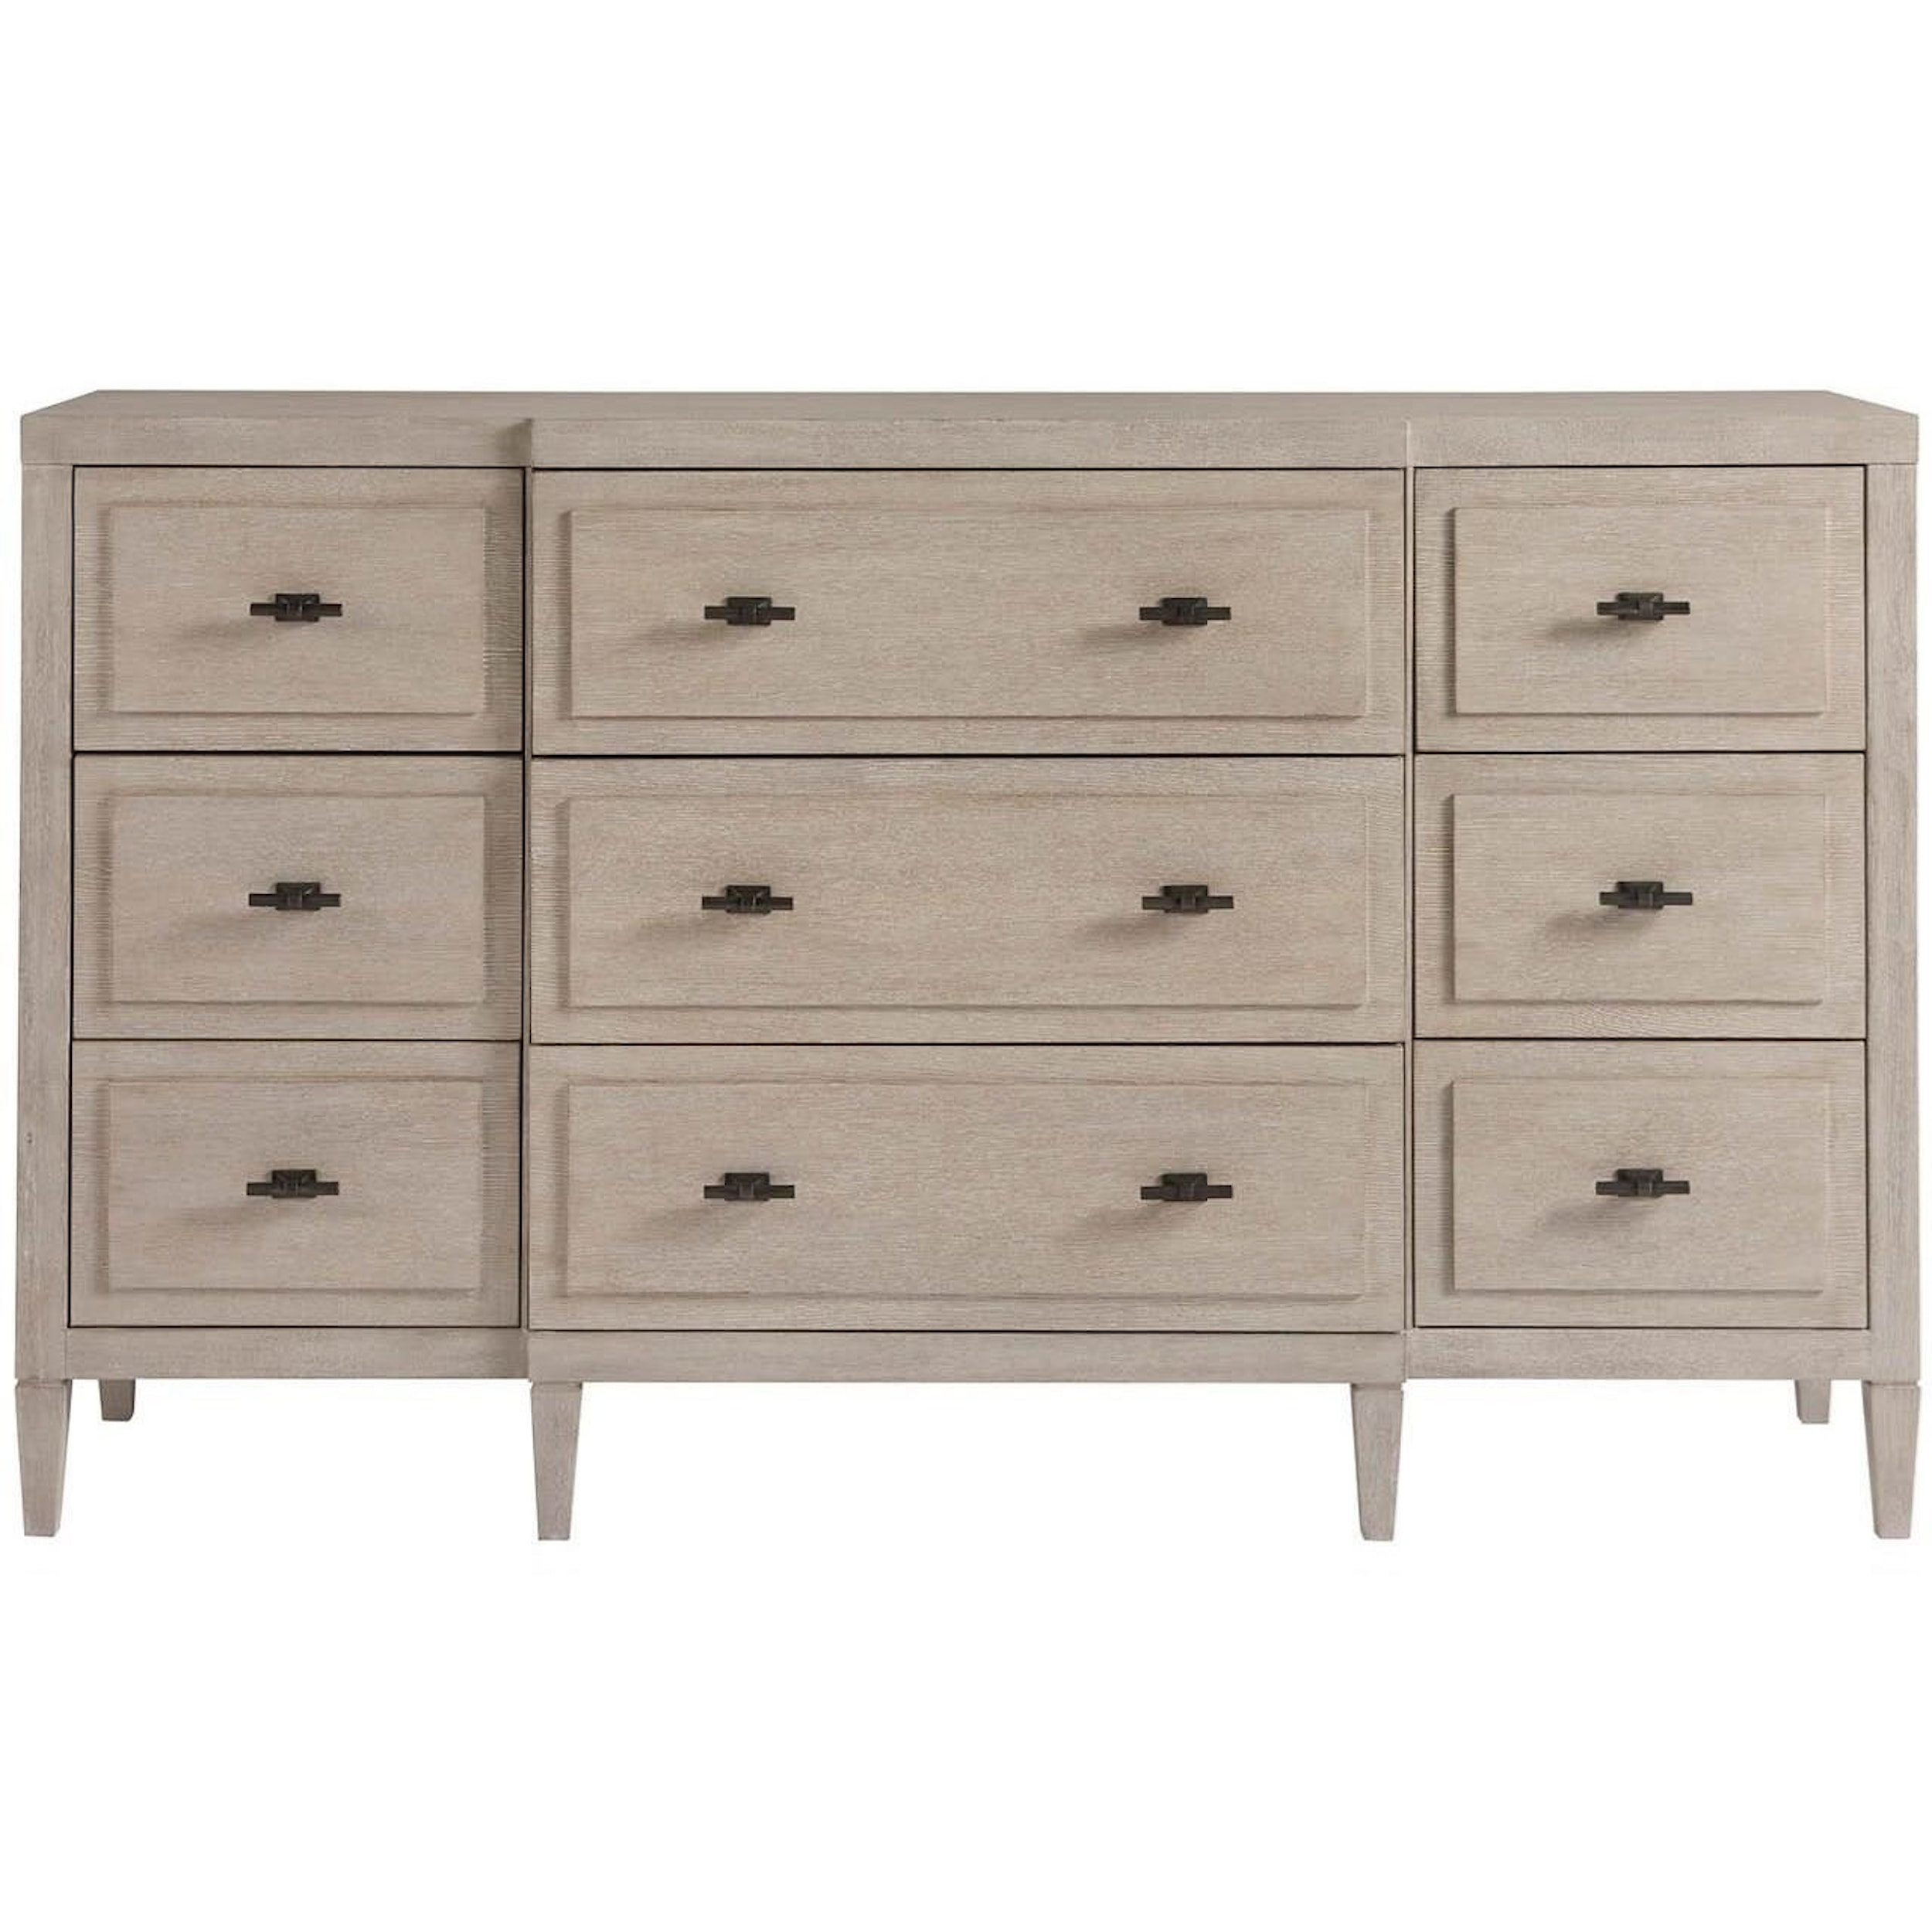 Universal Midtown 805040 Transitional 9-Drawer Dresser with Jewelry ...